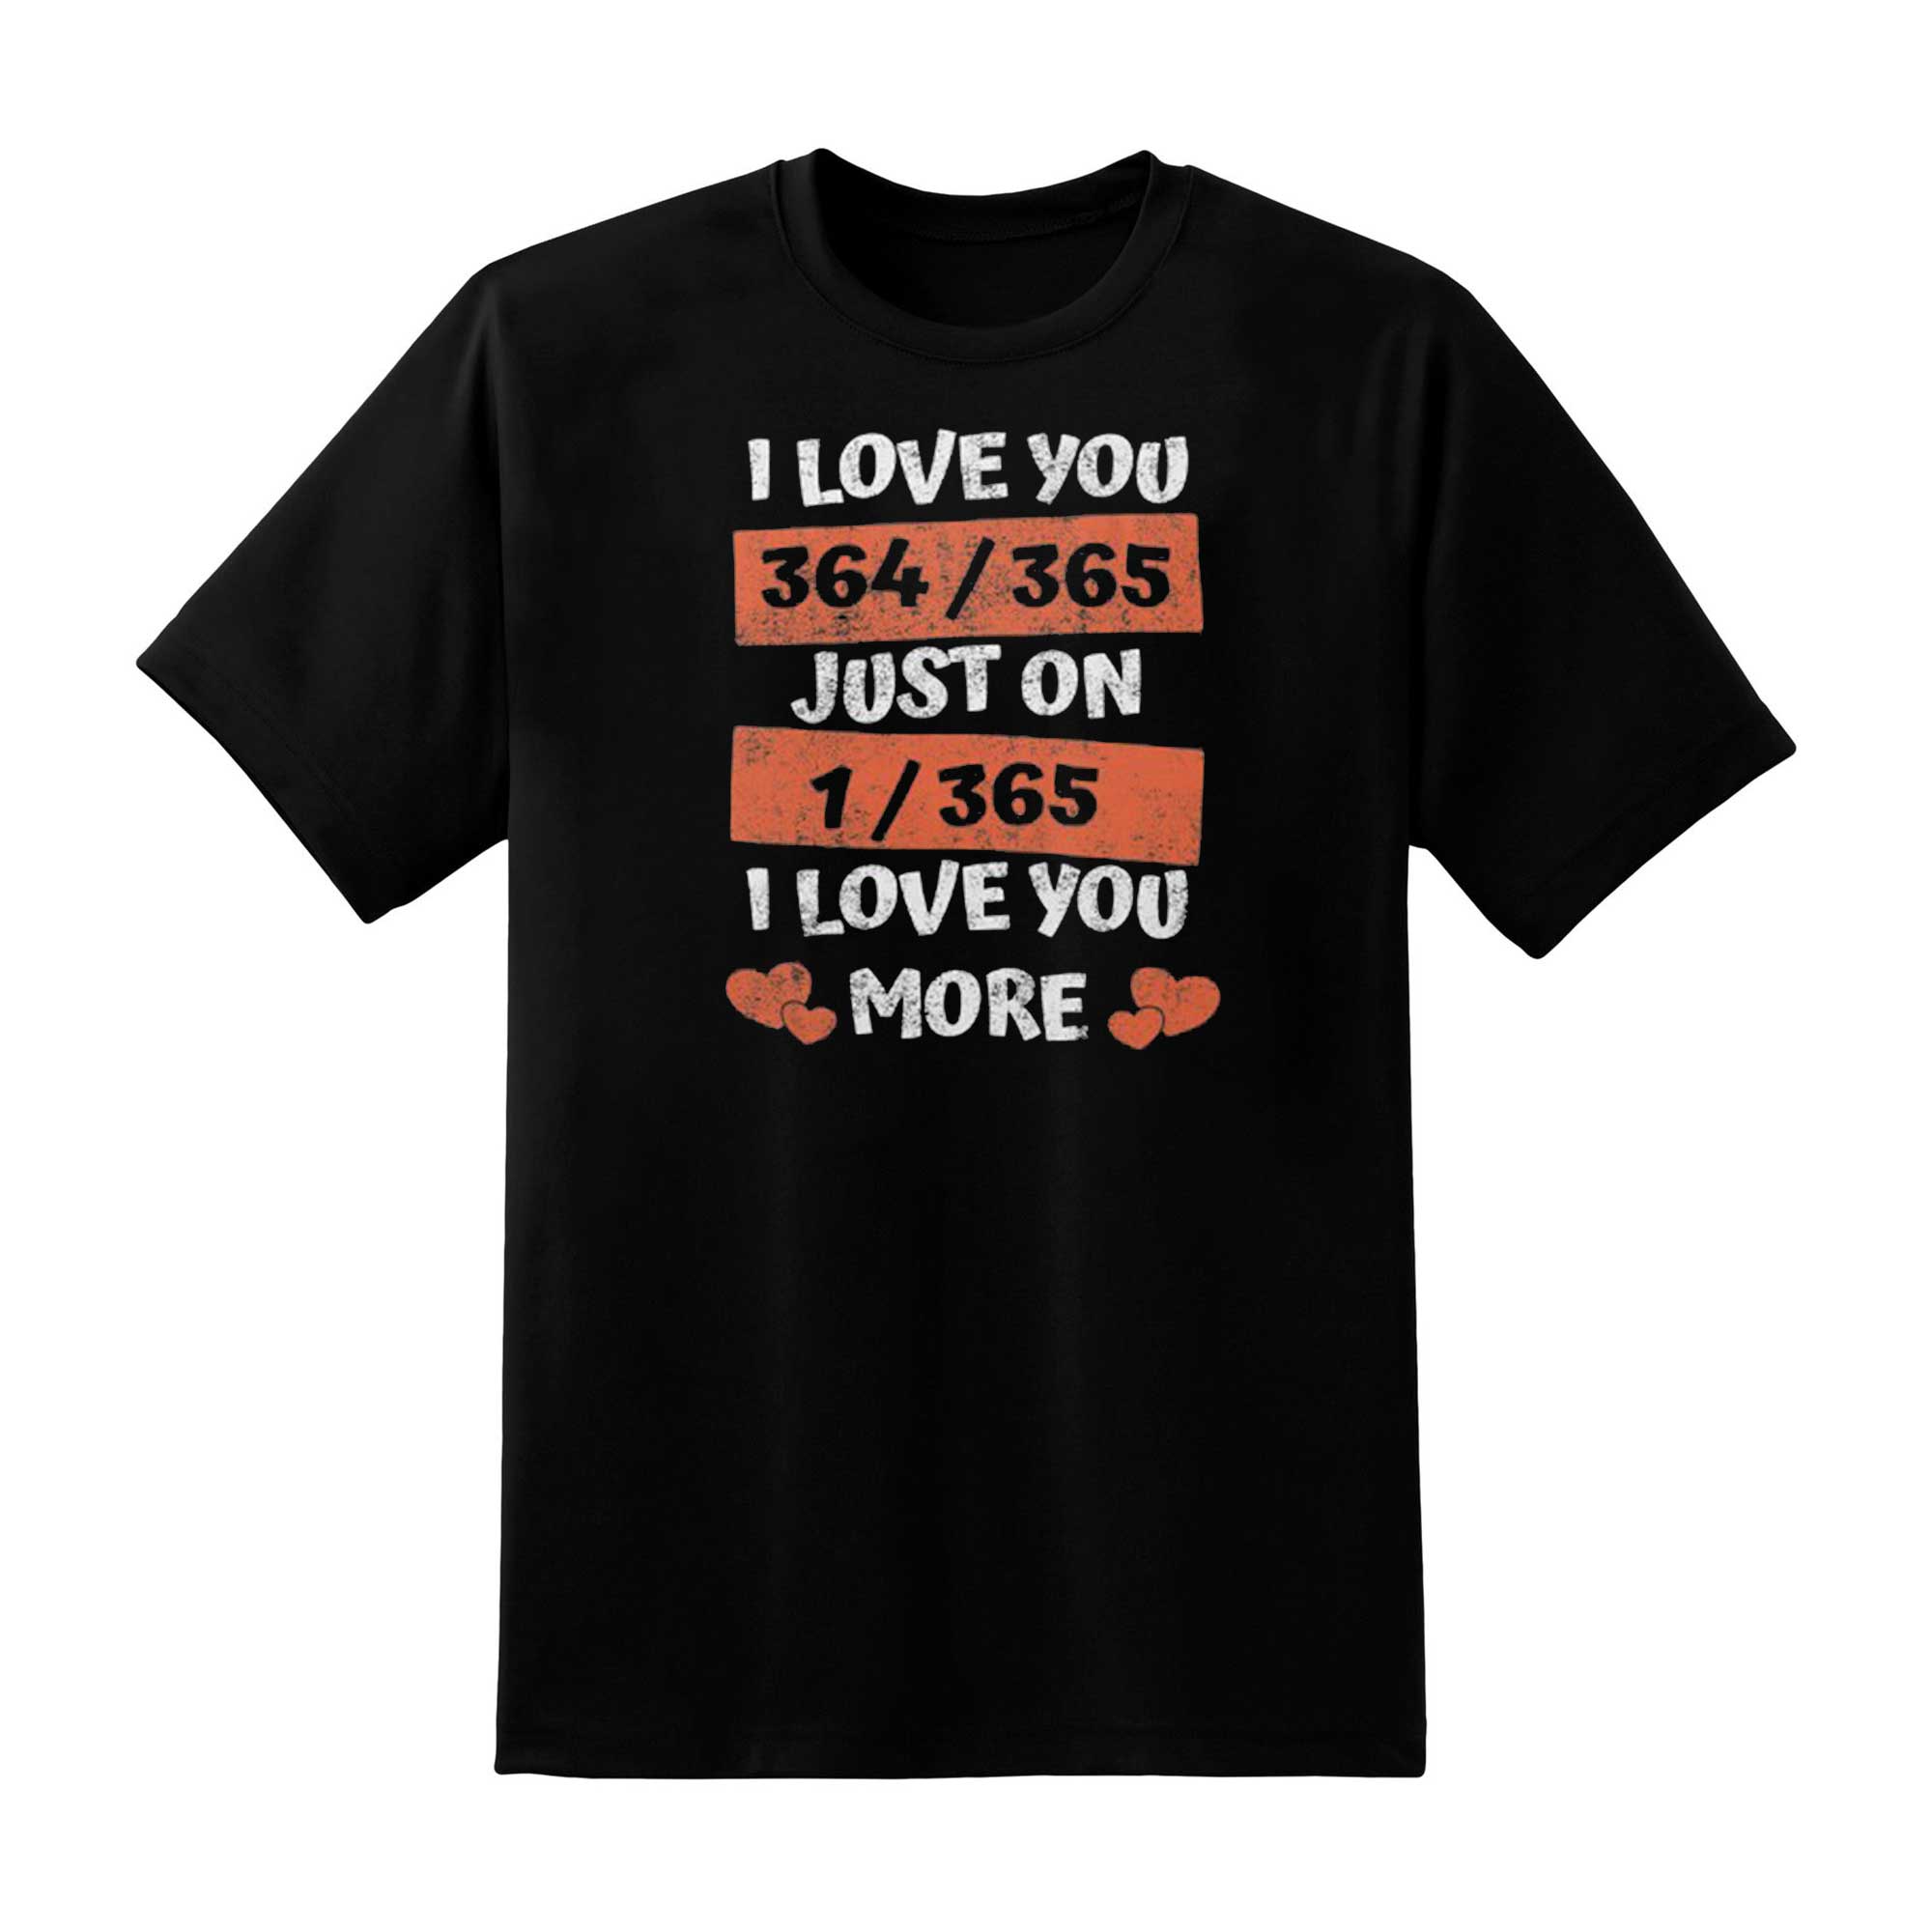 Skitongift On Valentines Day I Love You More Classic T Shirt Funny Shirts Hoodie Sweater Short Sleeve Casual Shirt Regular Fit